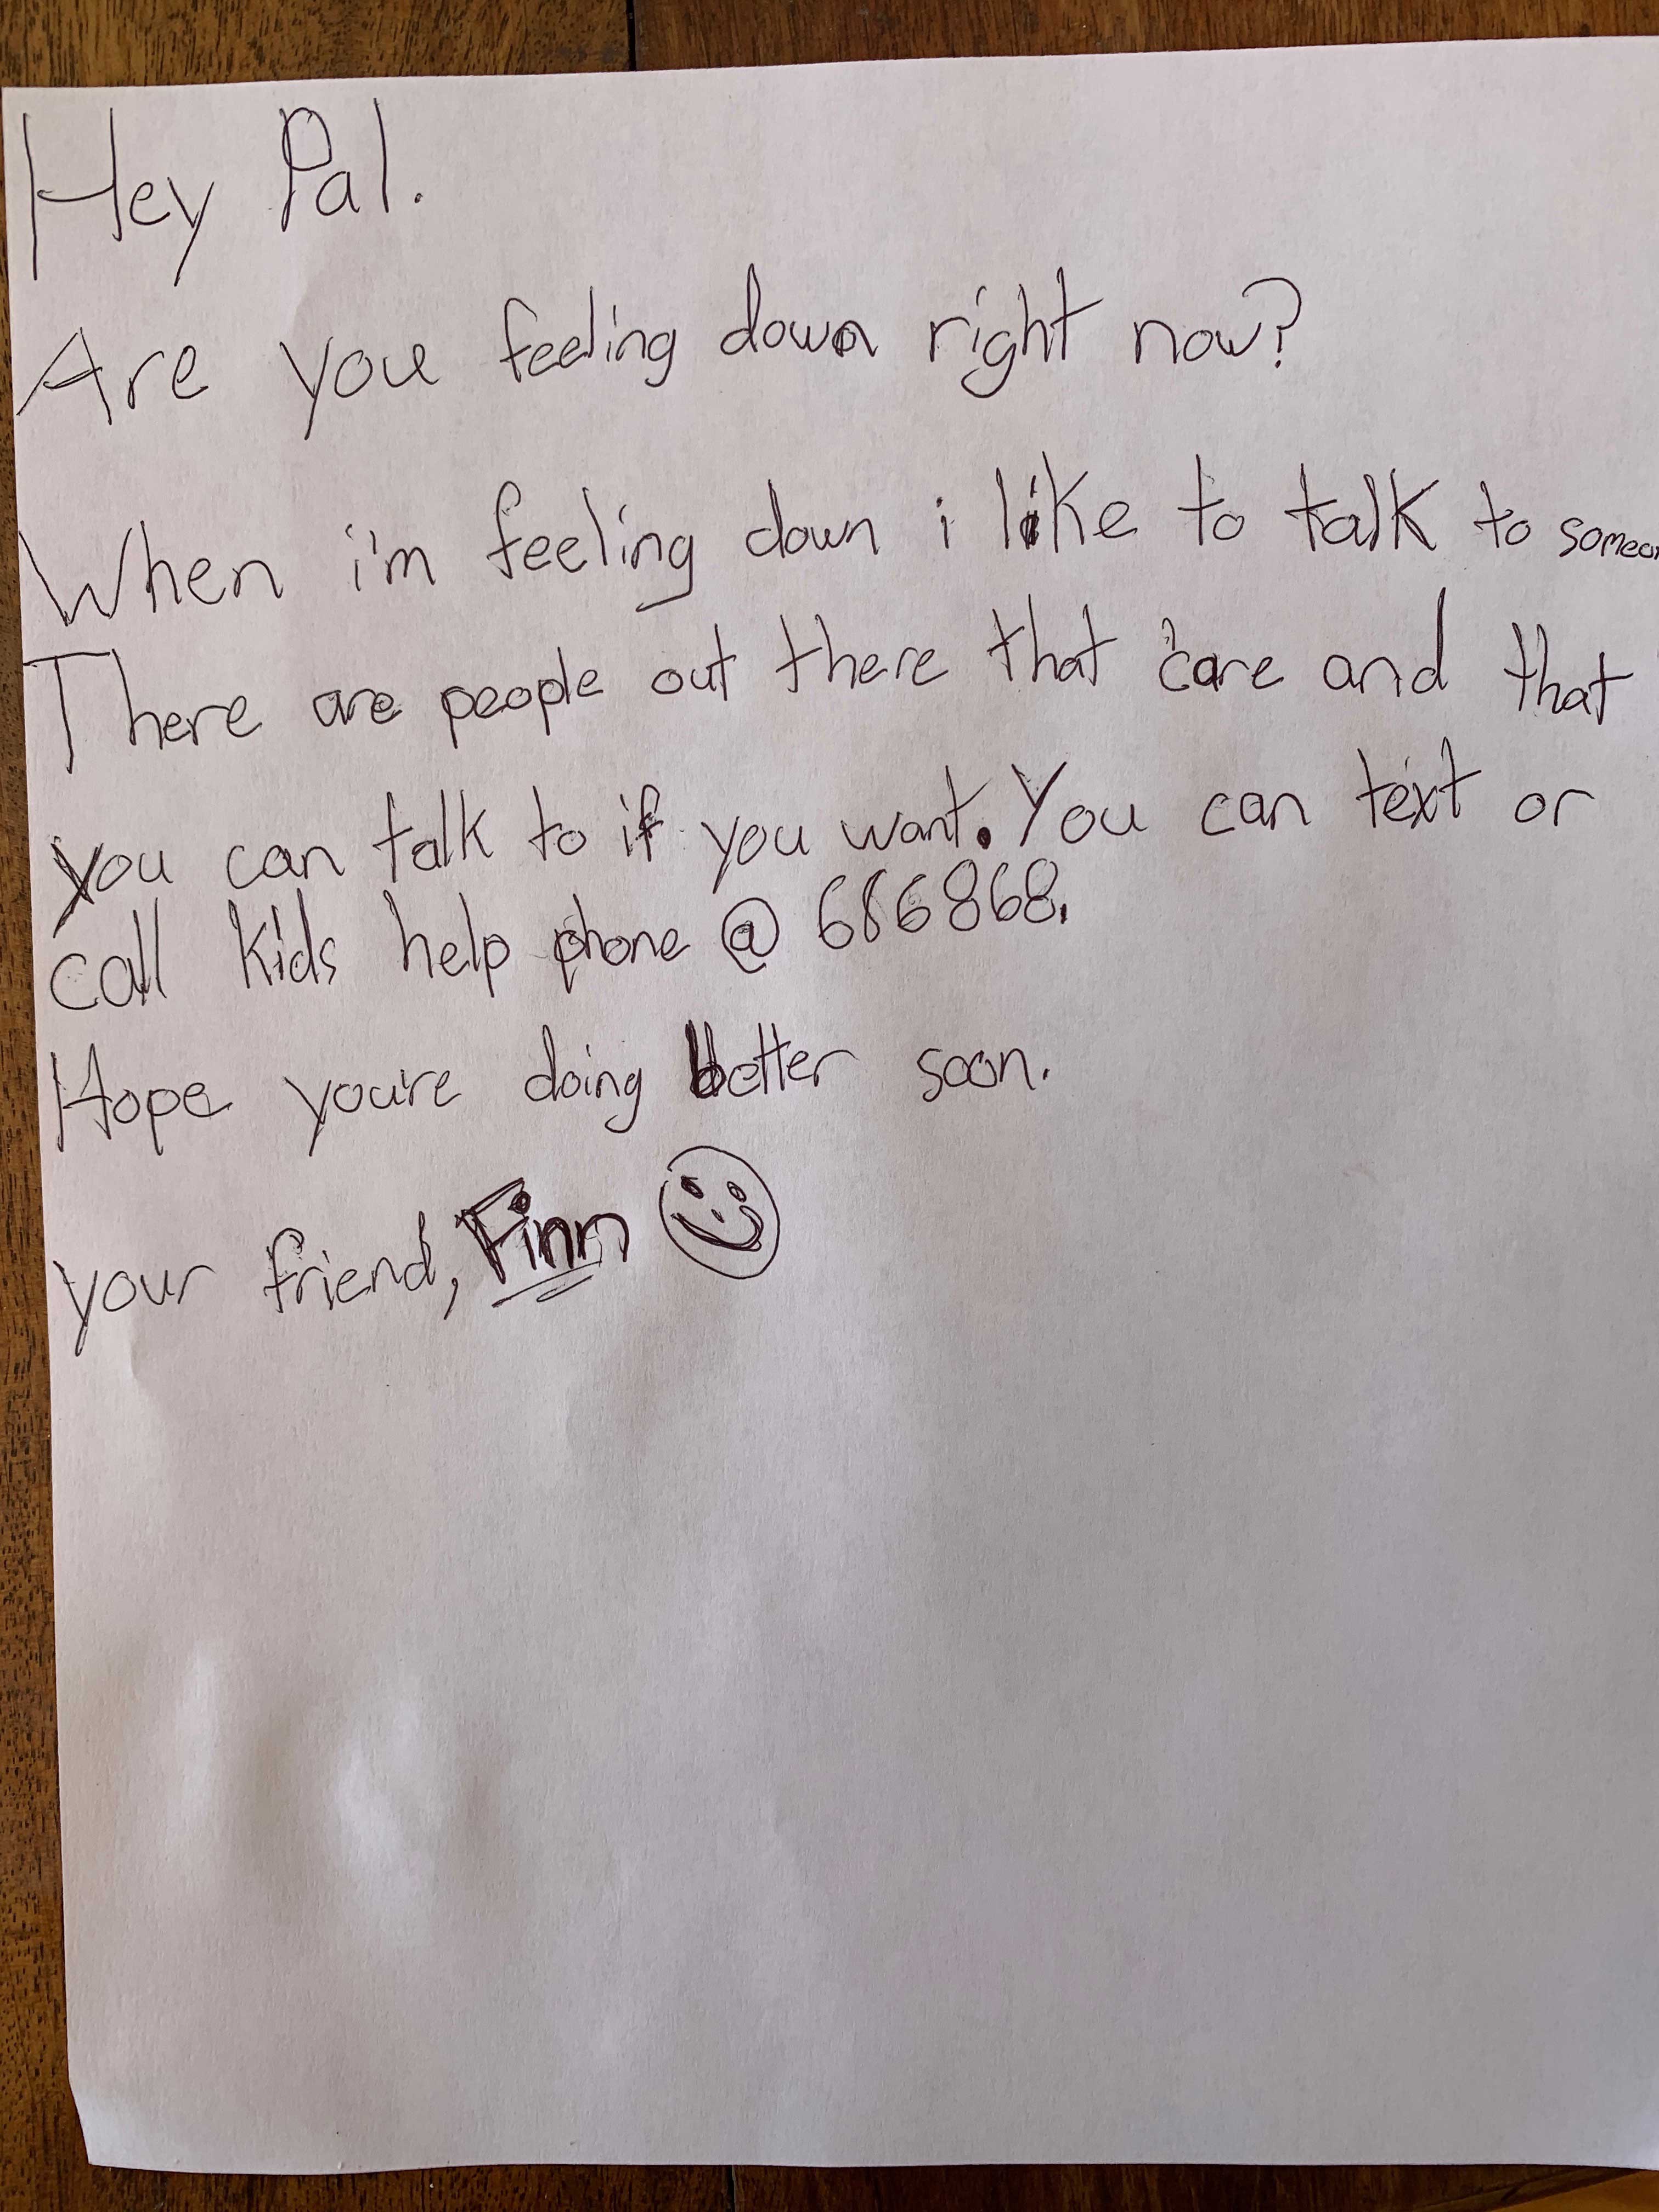 Sad letters that will make you cry